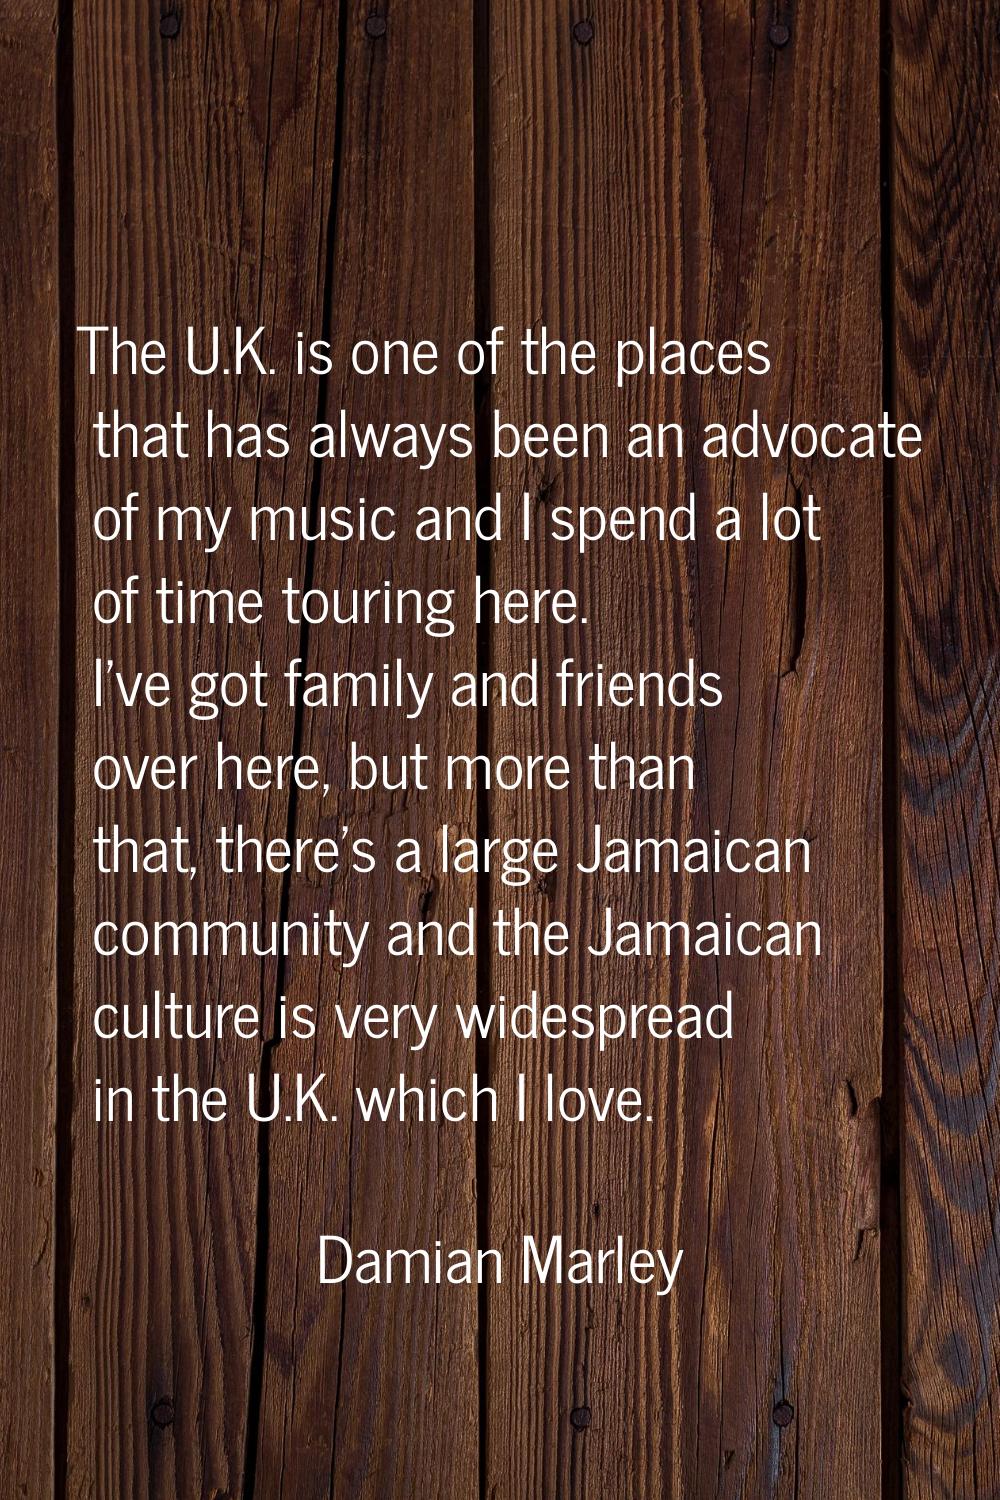 The U.K. is one of the places that has always been an advocate of my music and I spend a lot of tim